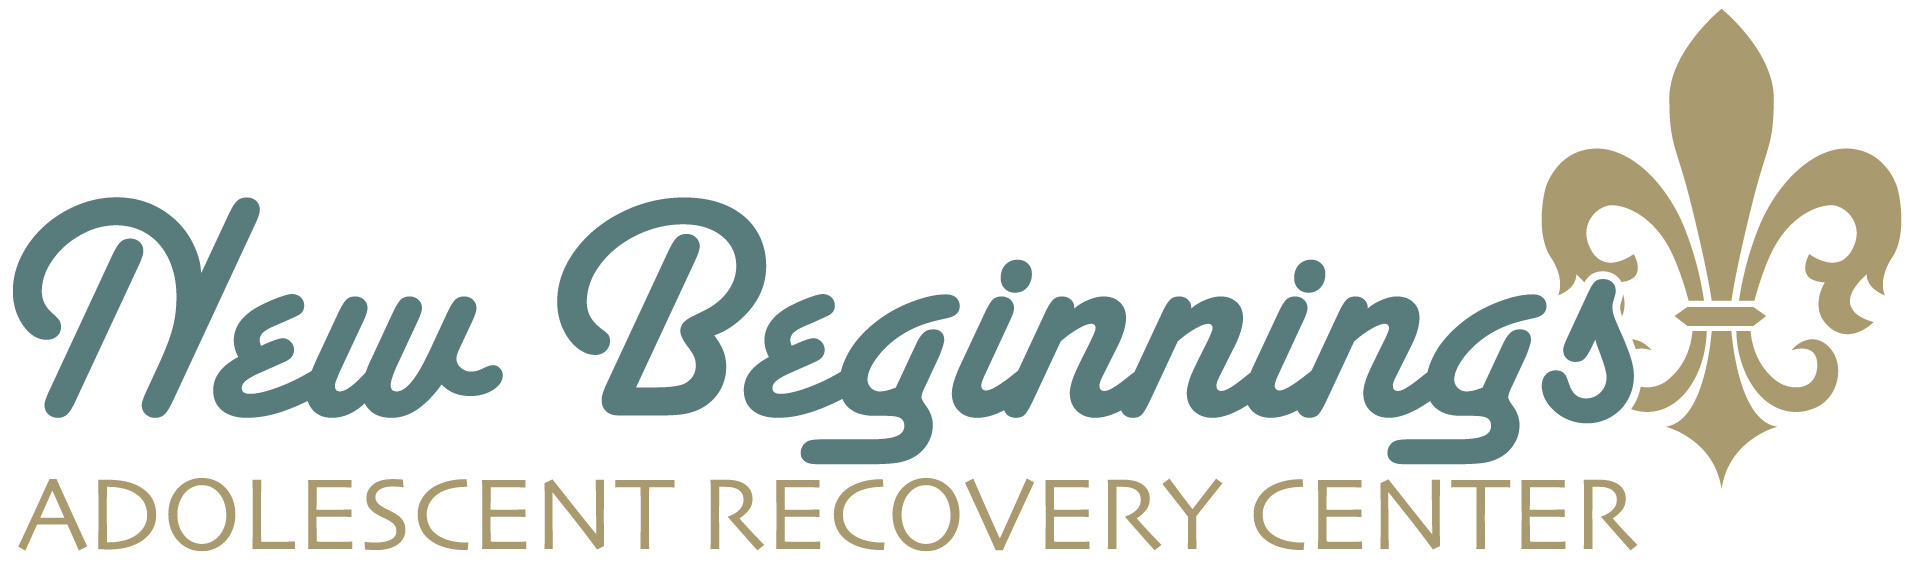 New Beginnings Adolescent Recovery Center is the leading teen residential treatment program in the Southwest and one recognized nationwide for teen rehabilitation